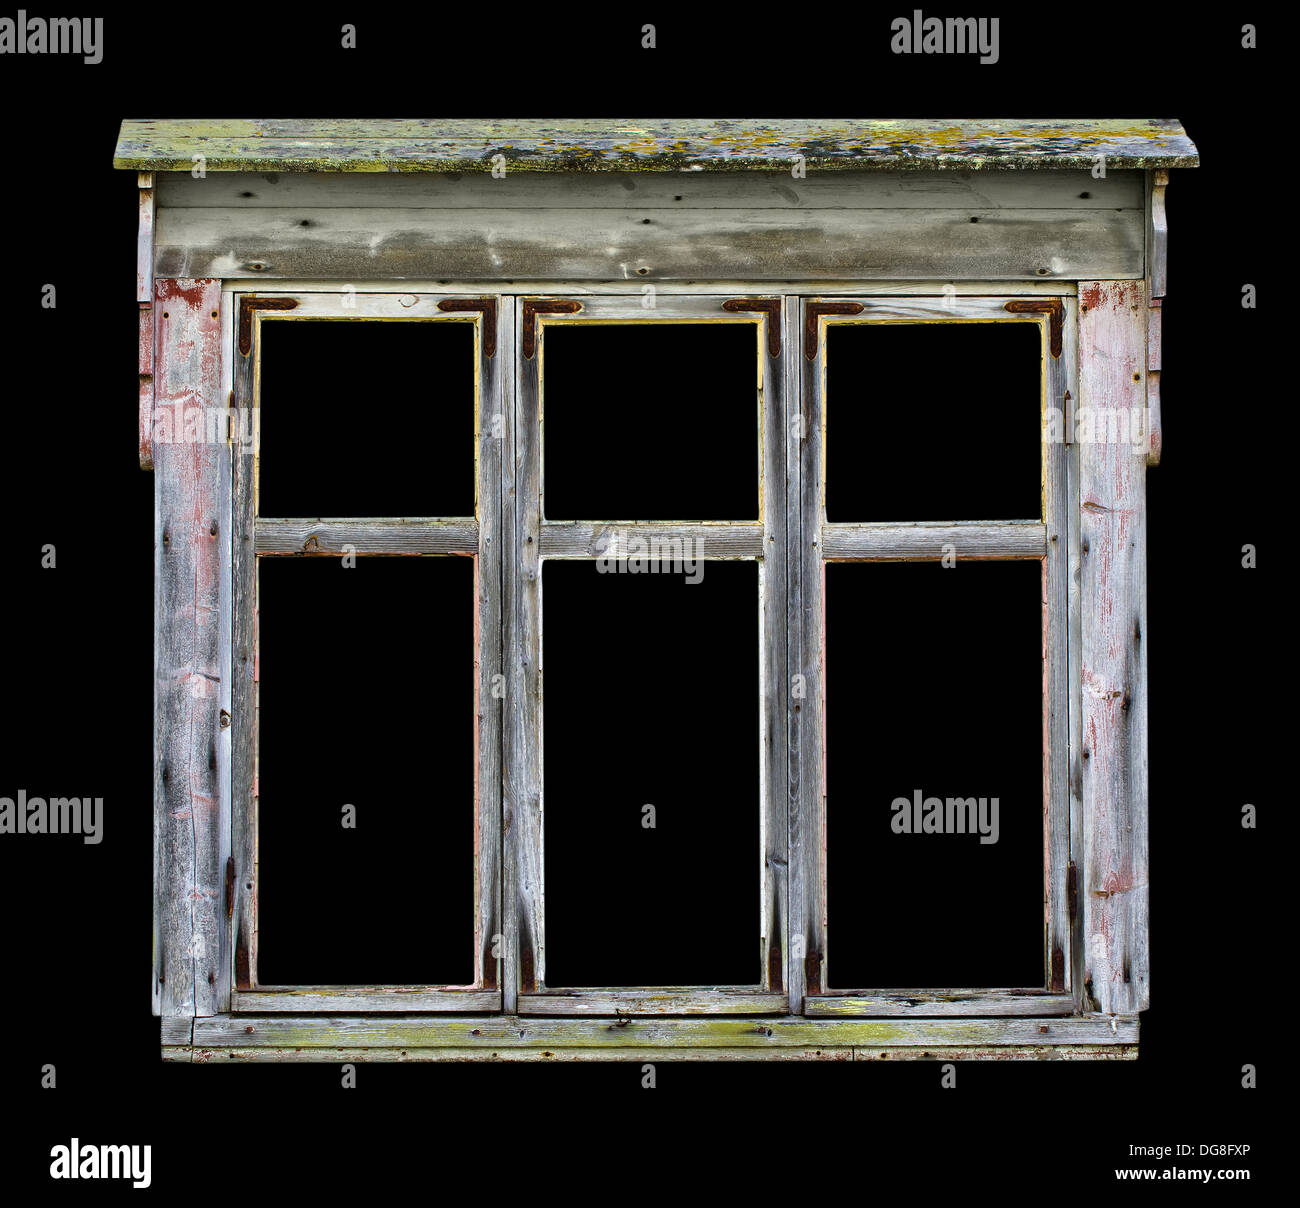 Old rustic wooden window frame for photos and paintings background, isolated over black (clipping path included) Stock Photo